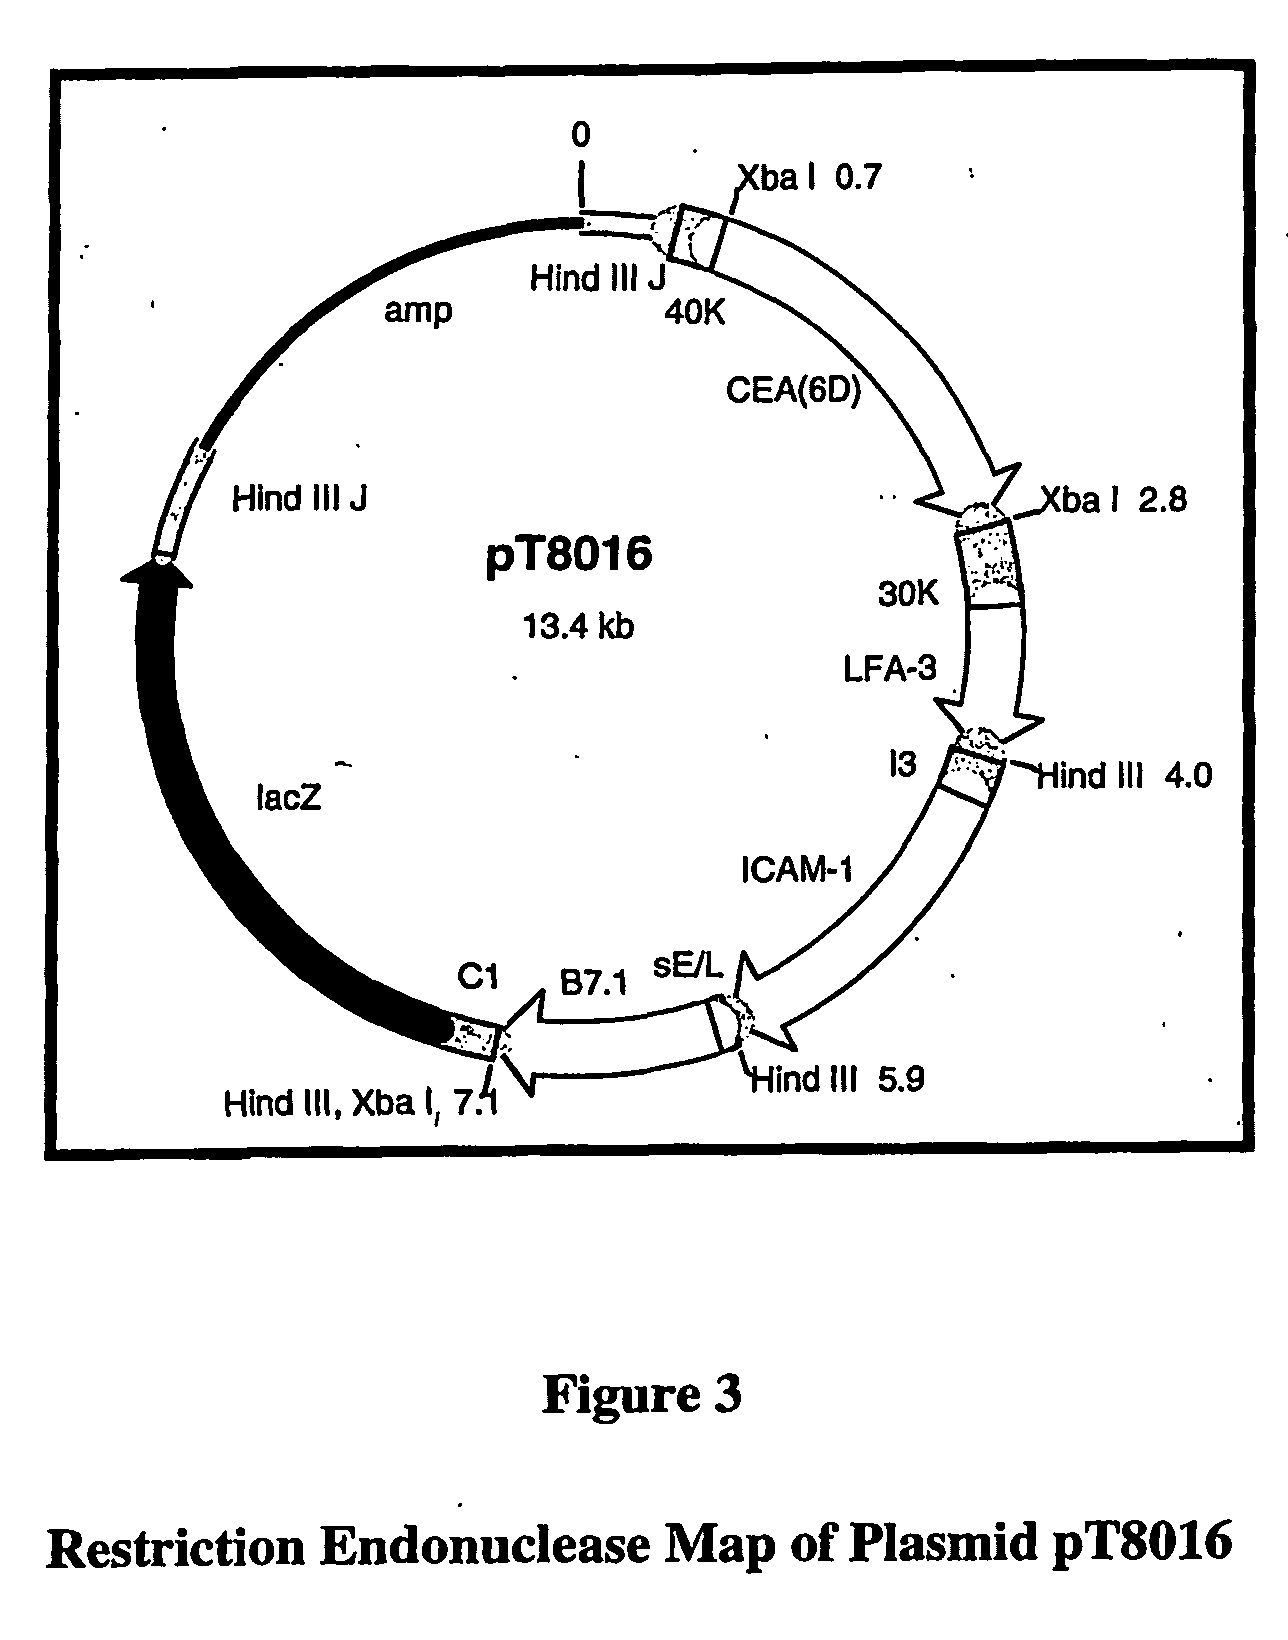 System for treating and preventing breast cancer